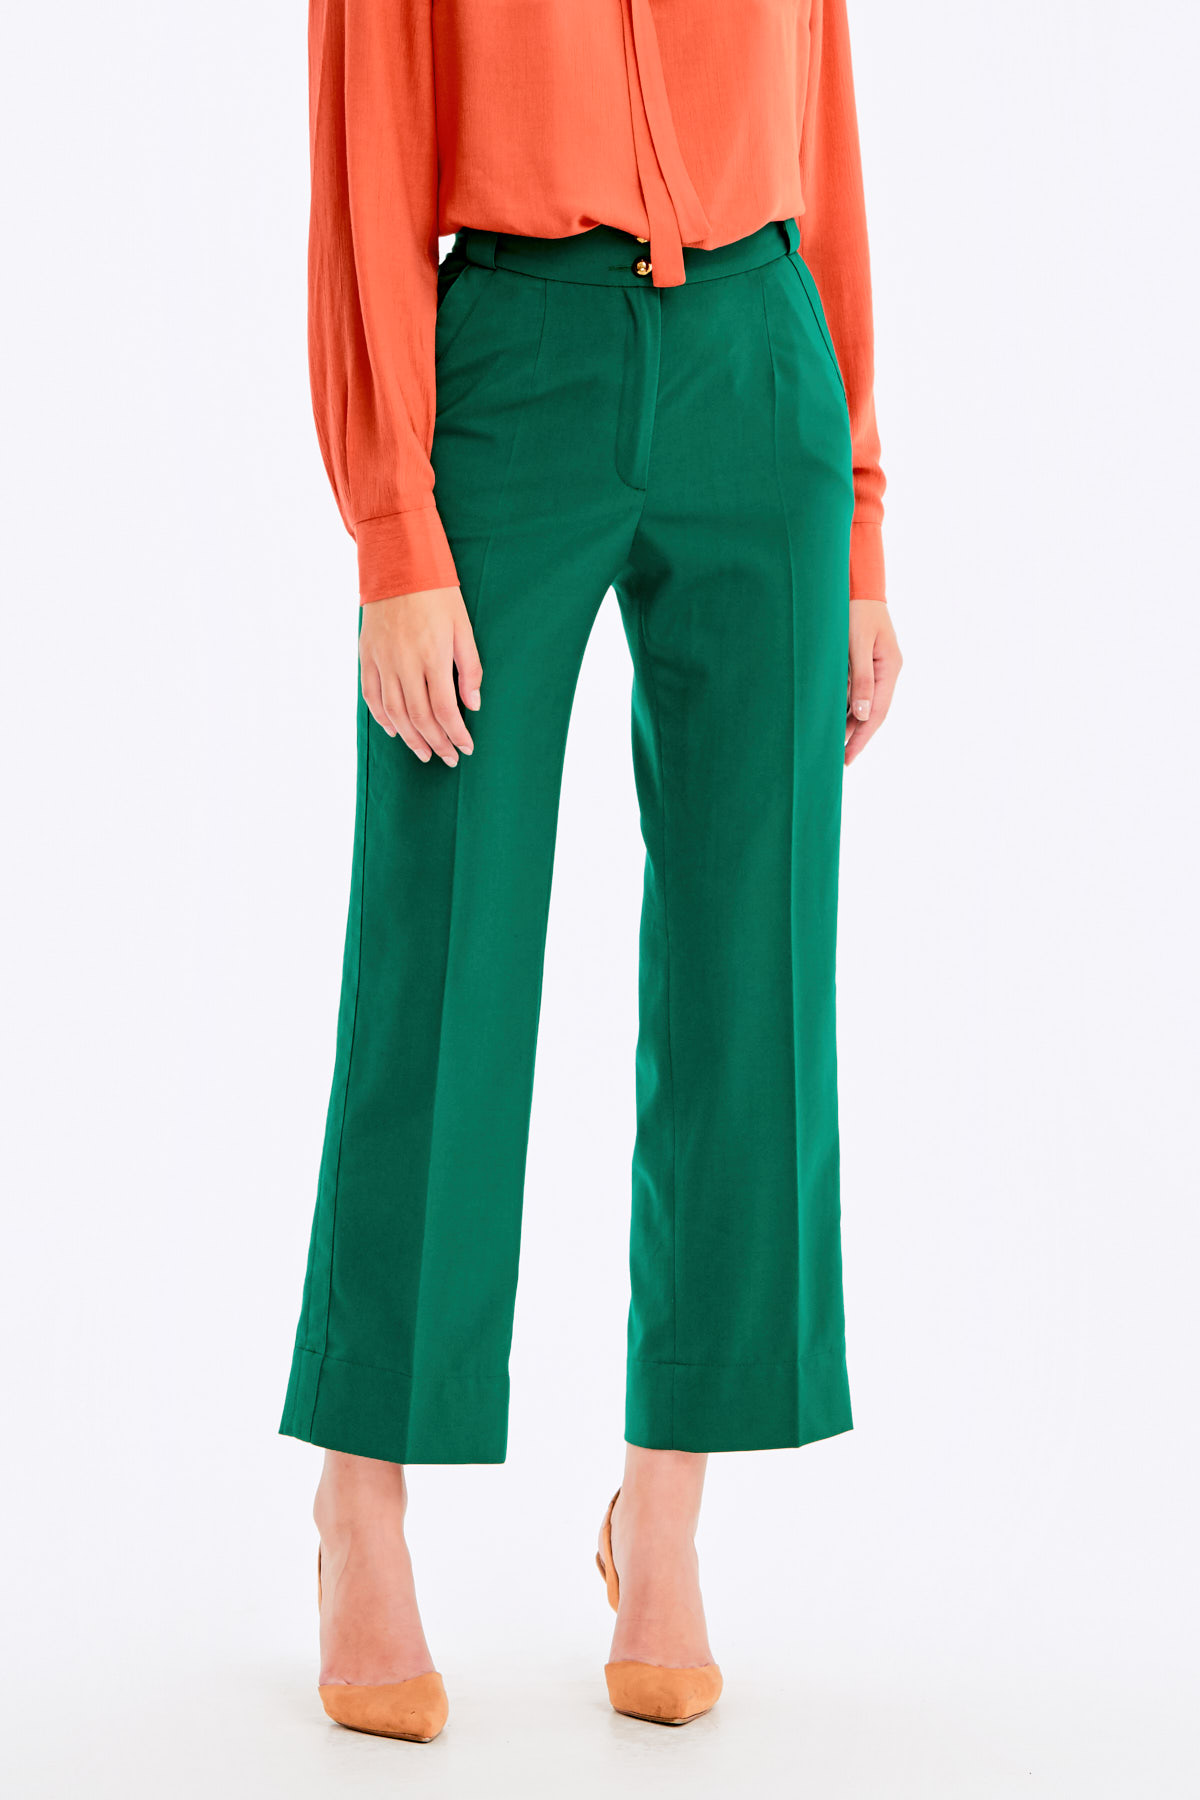 Green pants with trouserstripe, photo 1